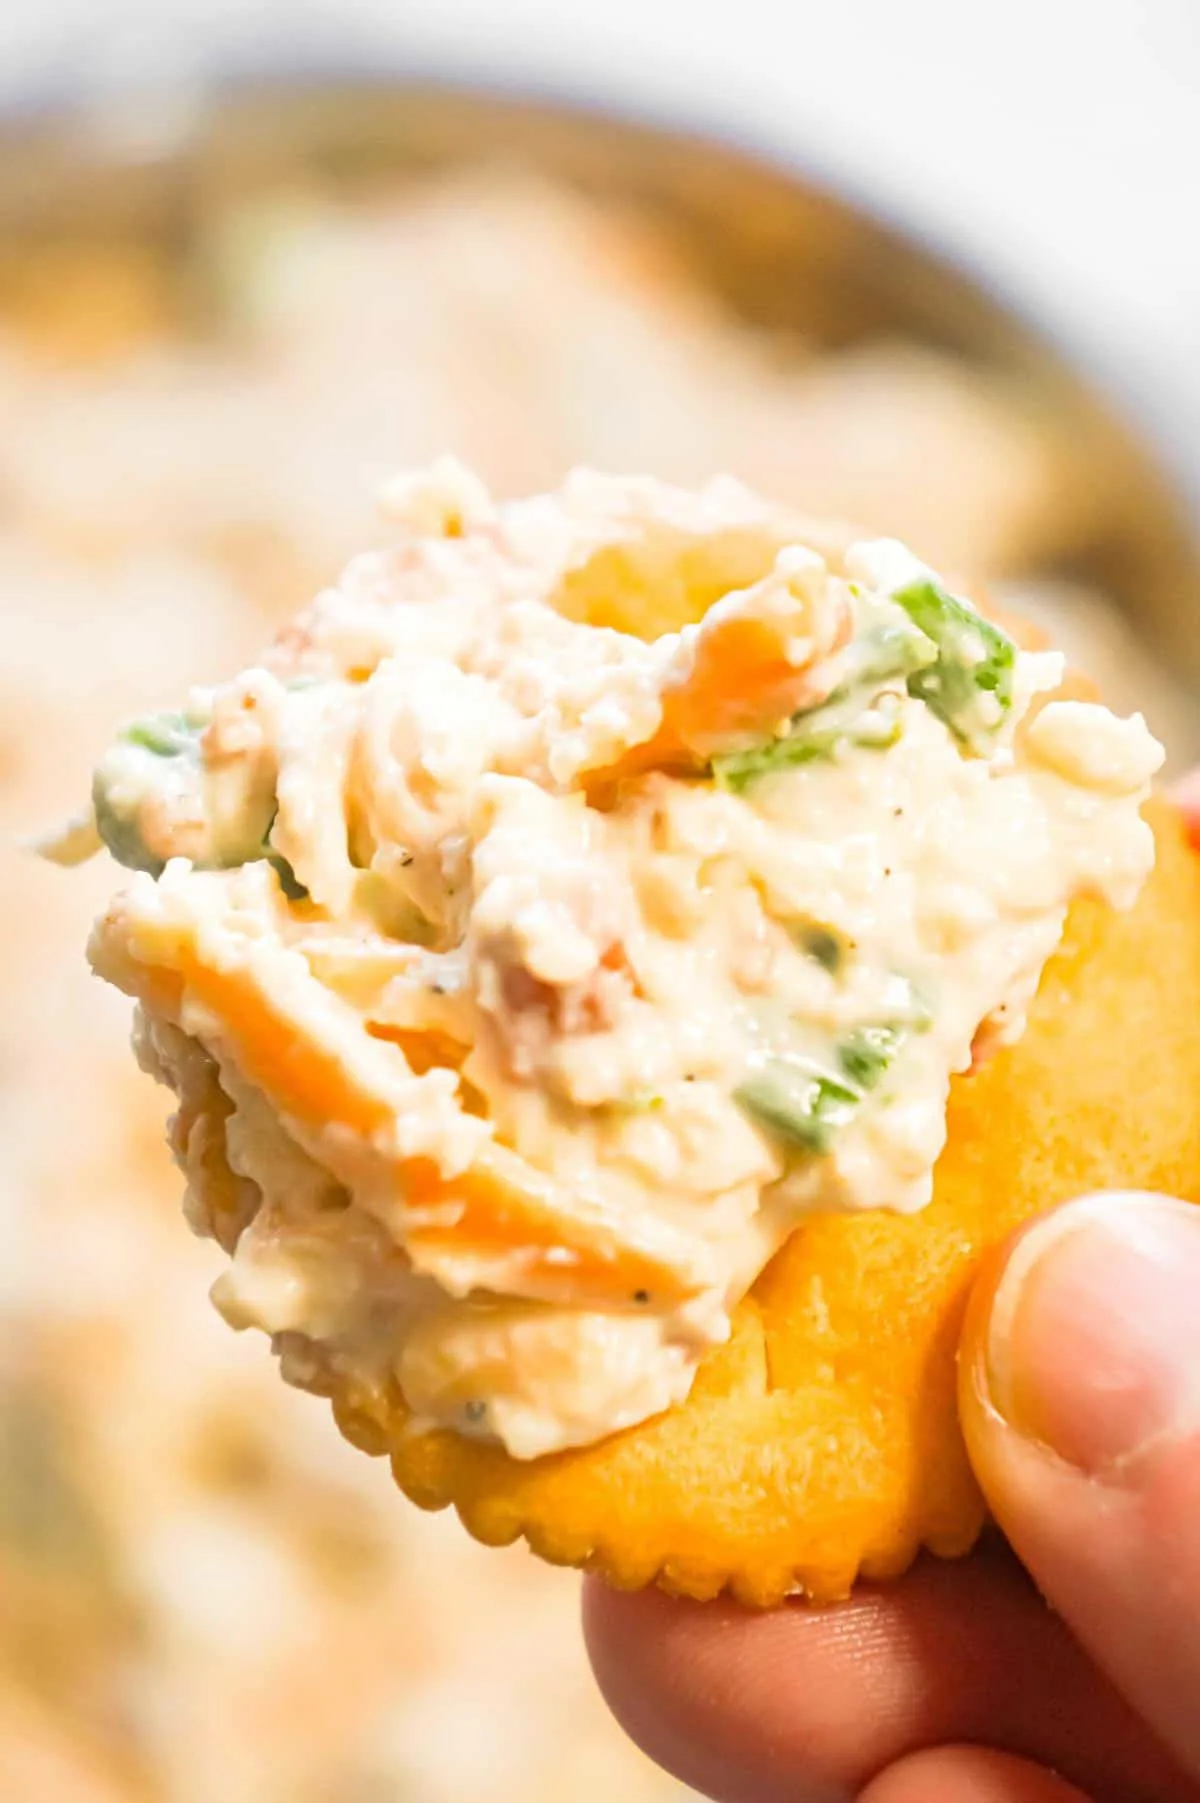 Bacon Cheddar Chicken Salad Dip is a delicious cold dip recipe loaded with mayo, cream cheese, canned chicken, crumbled bacon, chopped green onions and shredded cheddar cheese.